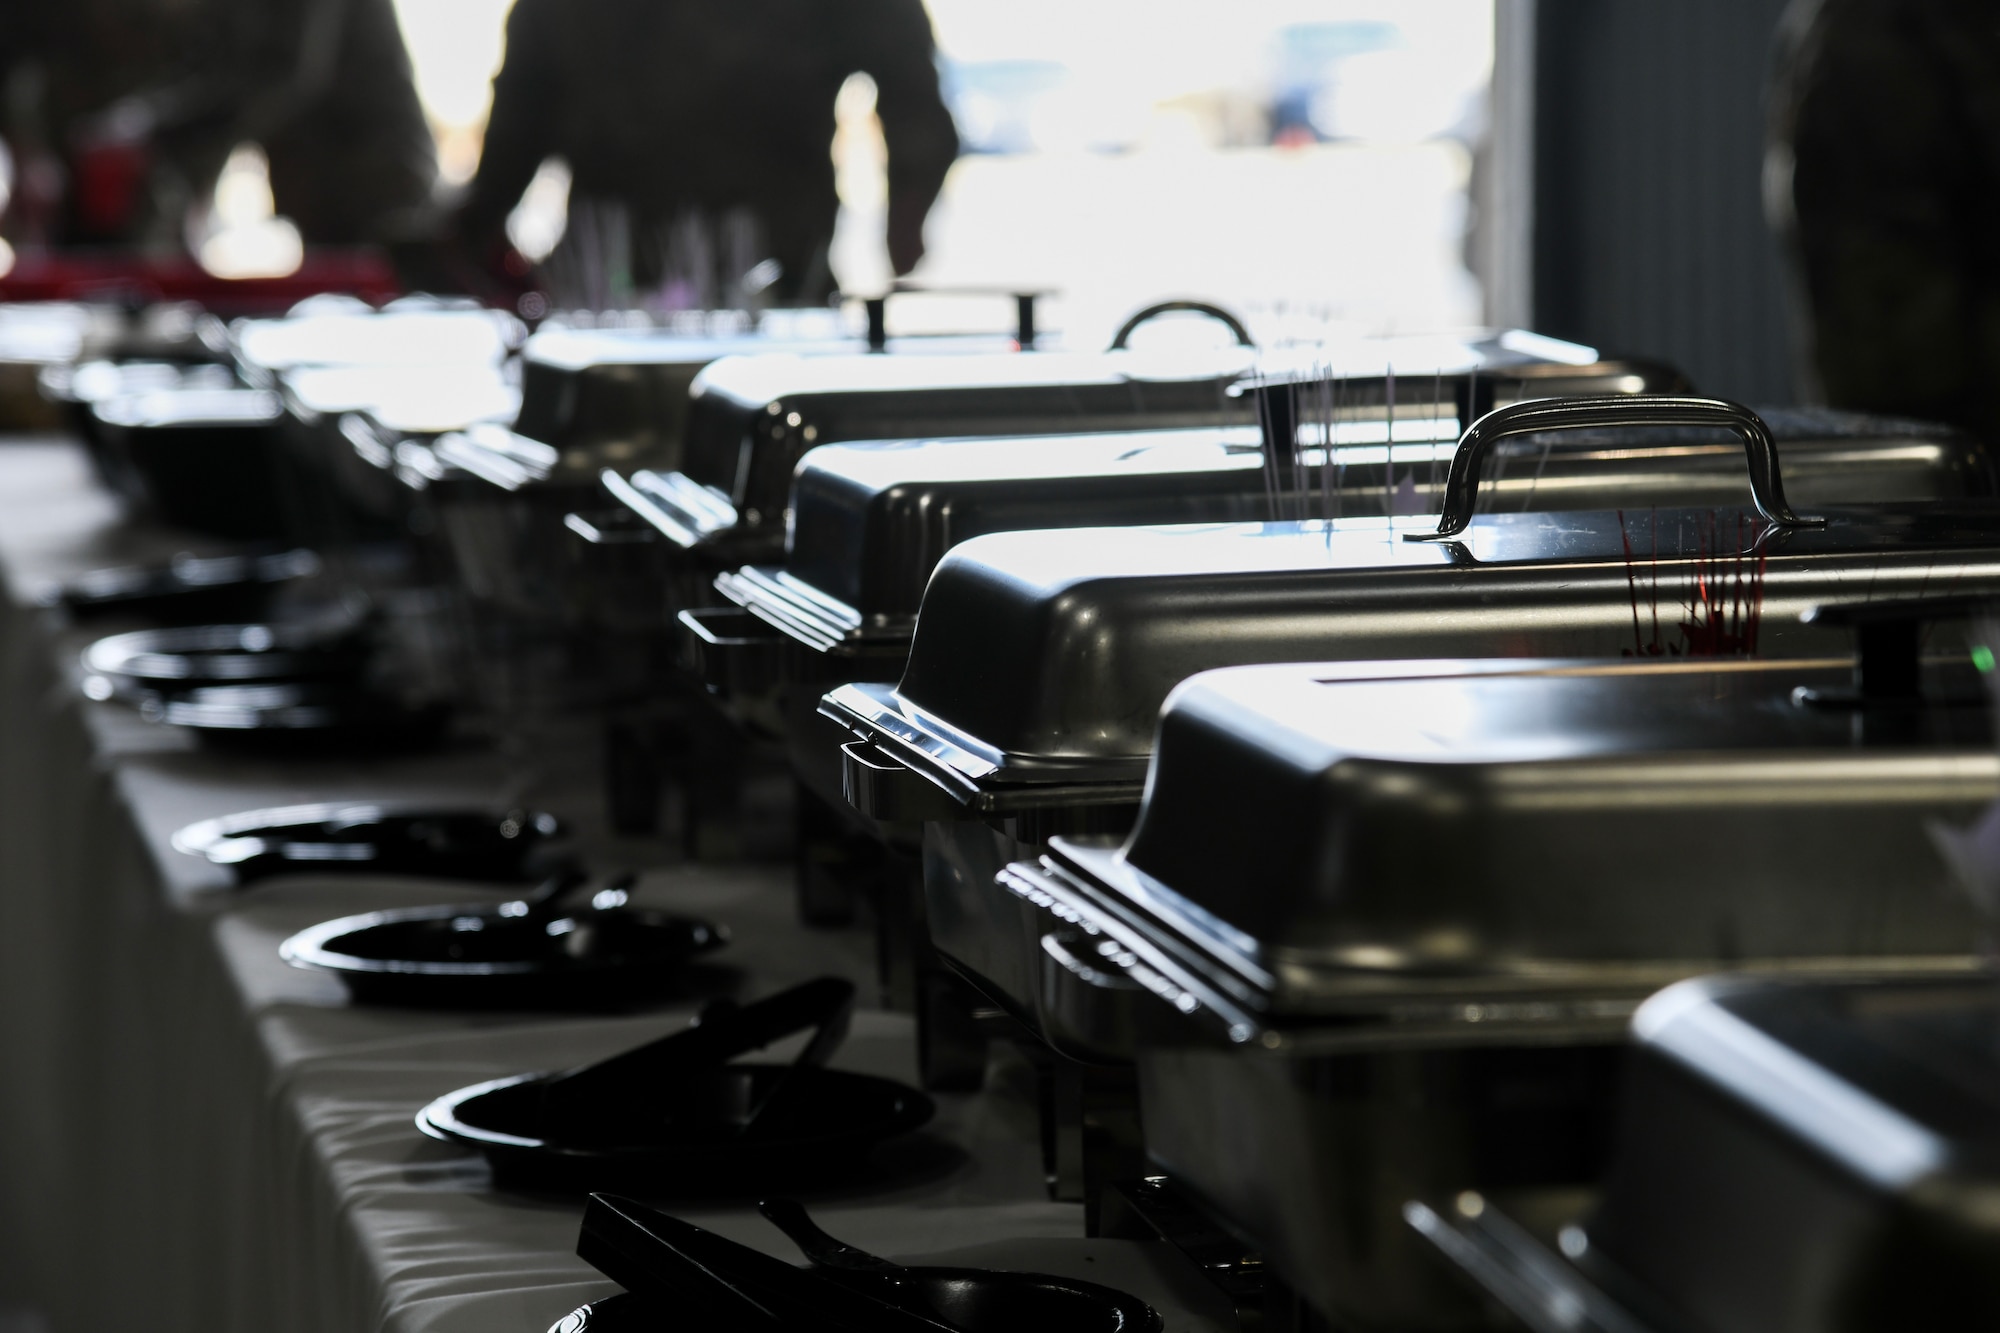 A photo of a line of chafing dishes sitting on a table.